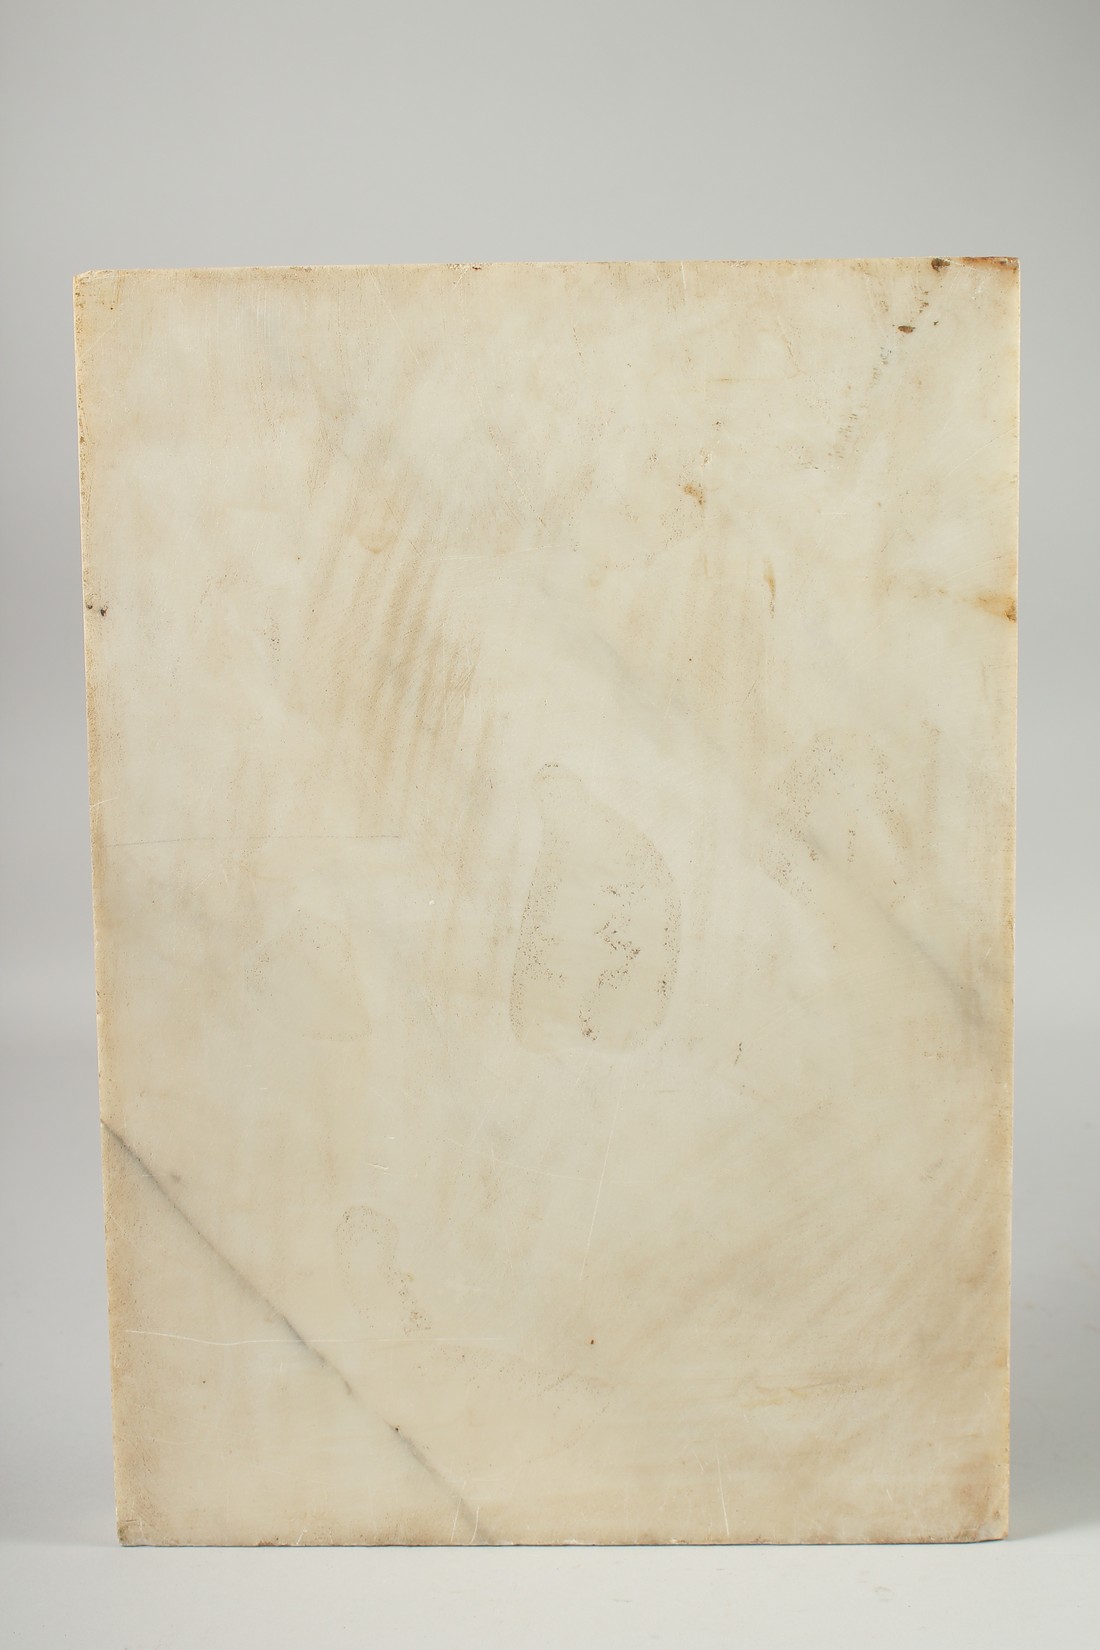 A CARVED WHITE MARBLE CALLIGRAPHIC PANEL, 35cm x 25cm. - Image 2 of 2